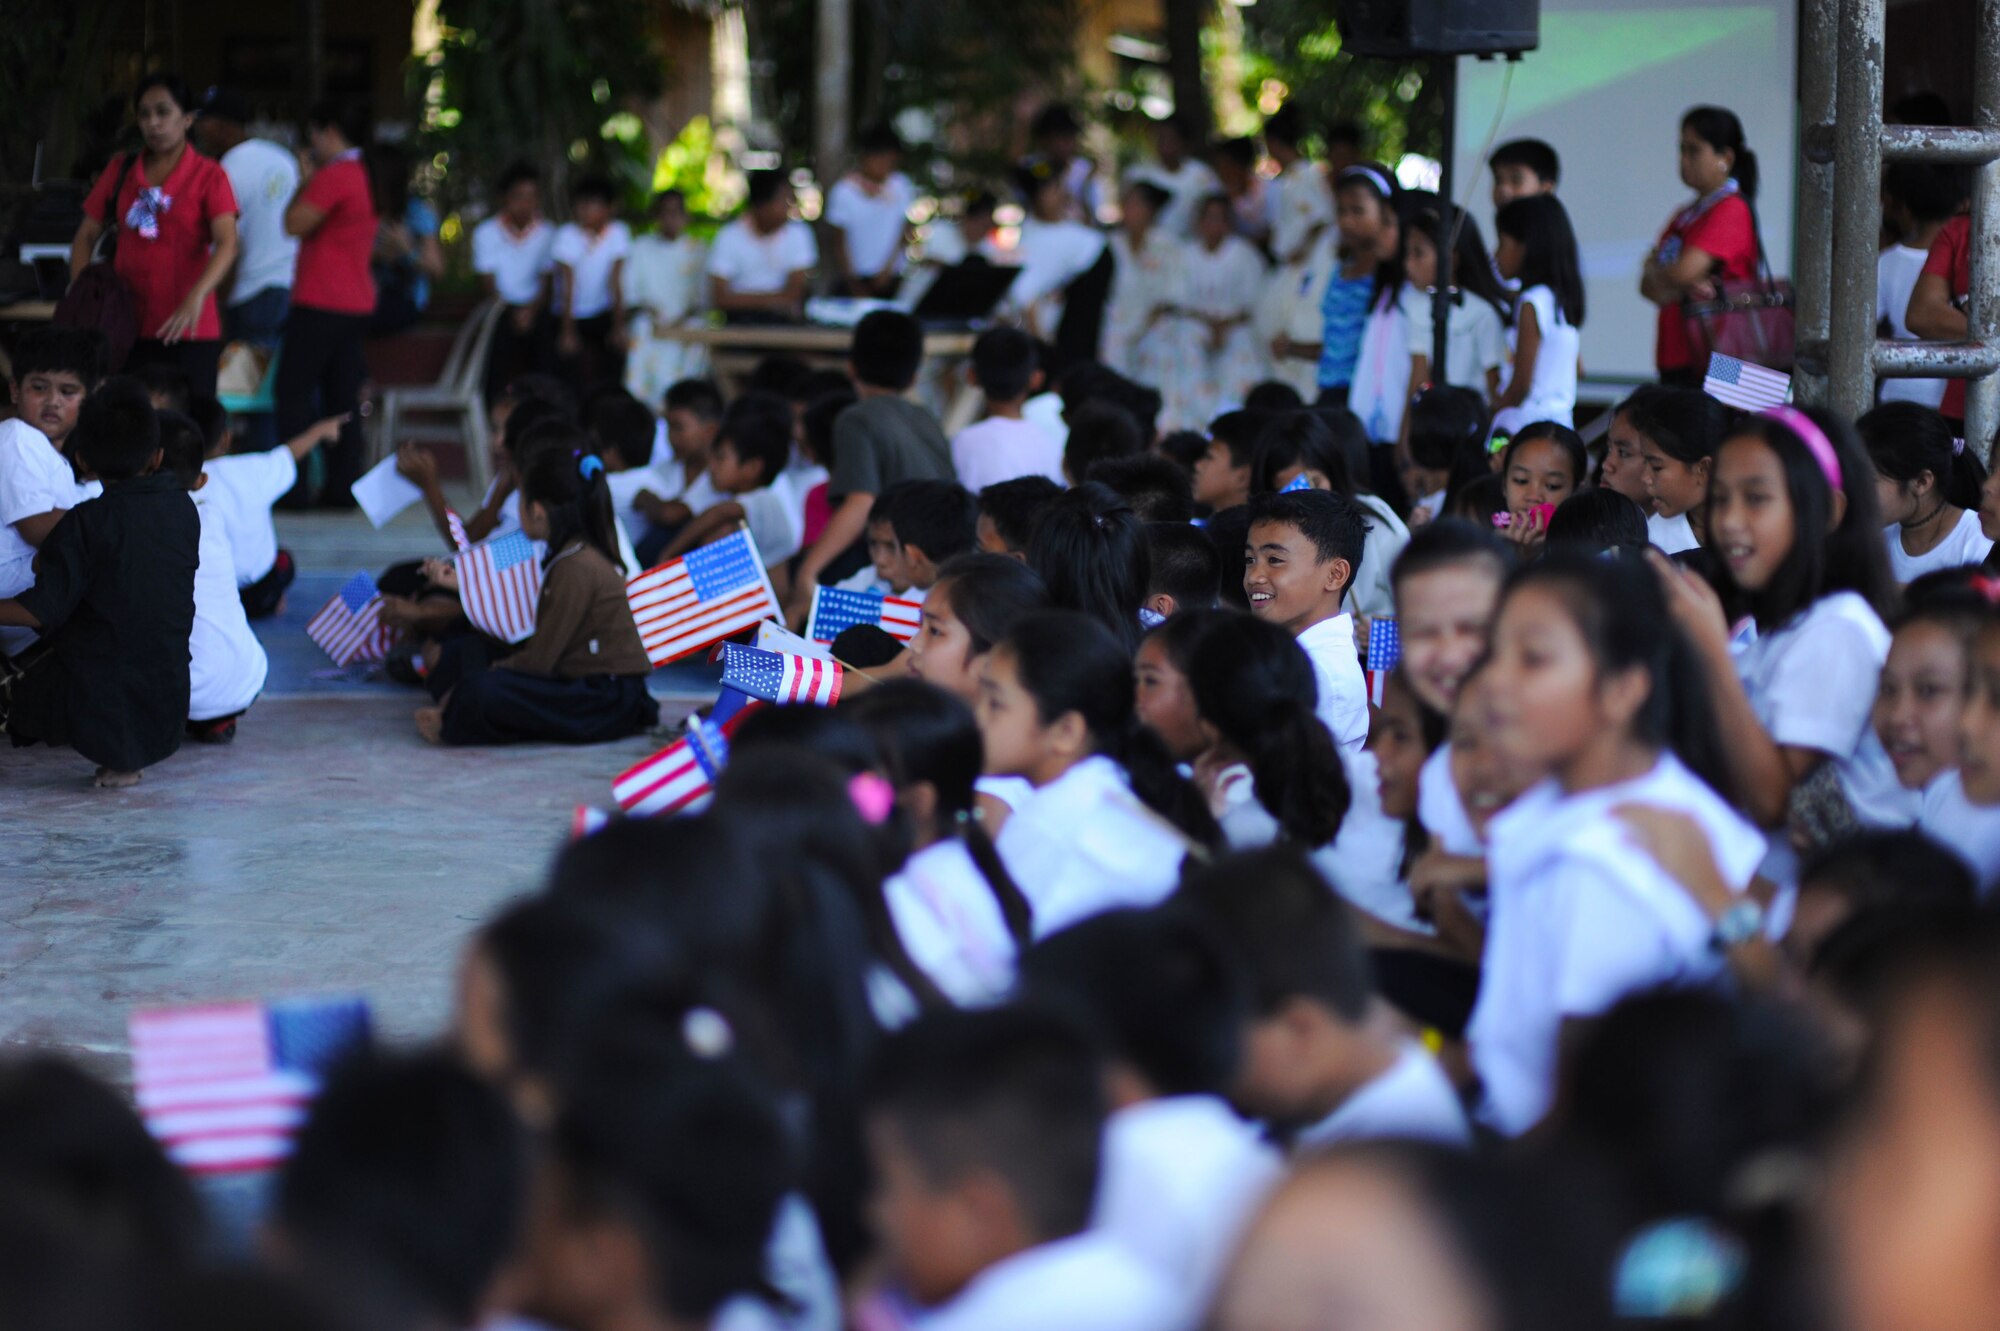 Students from Dao Elementary school attend the closing ceremony of Pacific Angel Philippines 15-1 in Bohol Provence, Philippines, Aug. 24, 2015. Over the course of six days, 5,101 patients received health care and six different schools were refurbished providing rehabilitated learning space to approximately 5,000 students, in addition approximately 10 subject matter expert exchanges occurred on topics ranging from crowd control to mass casualty events to public health outreach.  Efforts undertaken during Pacific Angel help multilateral militaries in the Pacific improve and build relationships across a wide spectrum of civic operations, which bolsters each nation’s capacity to respond and support future humanitarian assistance and disaster relief operations. (U.S. Air Force photo by Tech. Sgt. Aaron Oelrich)